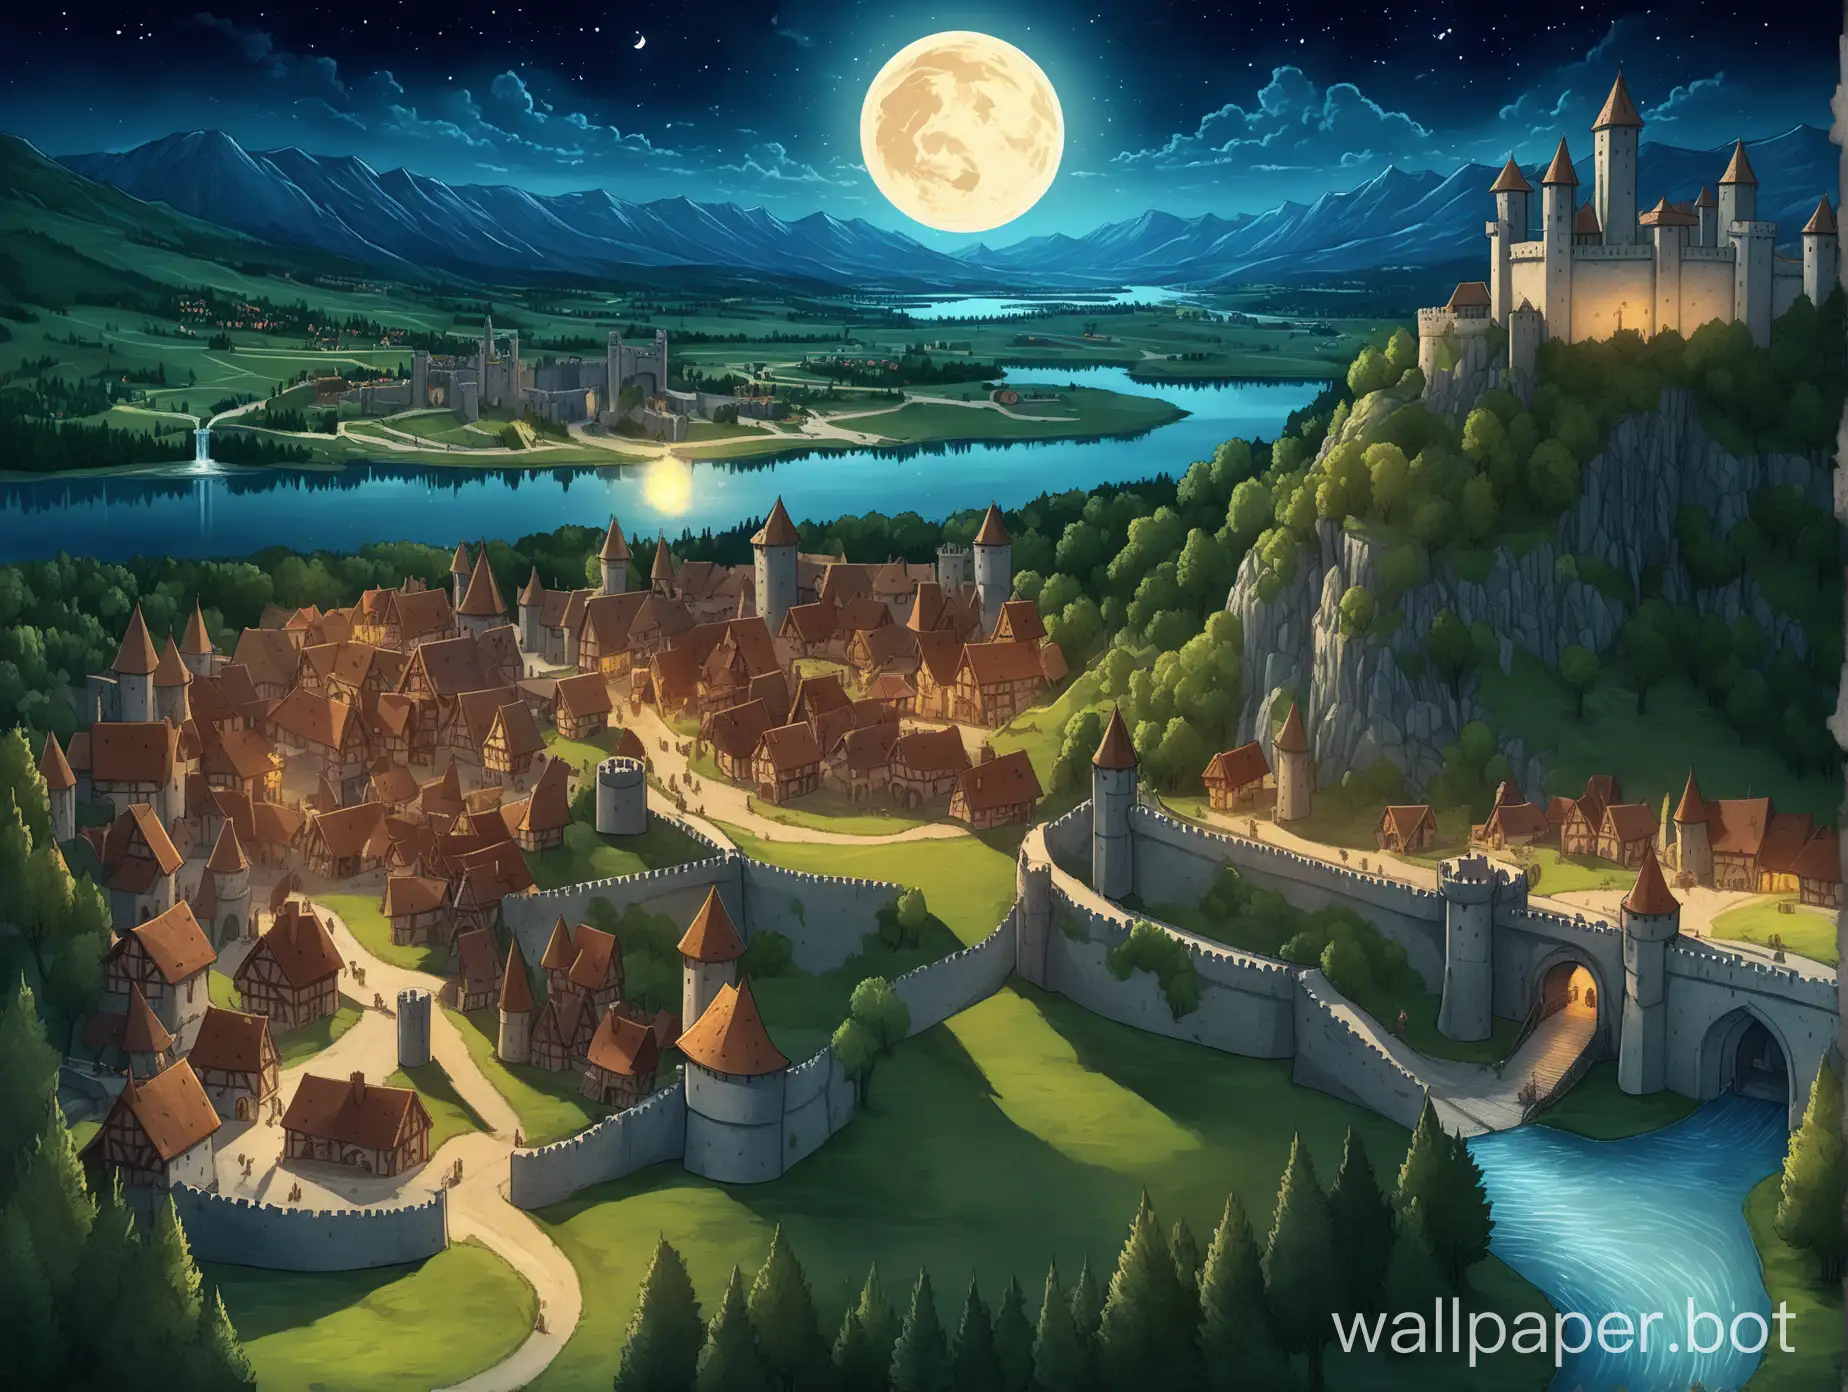 landscape, mountain in background, entire medieval village, fantasy, meadow, ramparts, fortifications, close aerial view of town, entrance view of town with a drawbridge, large trees, drawn style, colored, warm colors, detailed image, visible details, forest in the distance, waterfalls, lake, at night, lighting, moon, night scene